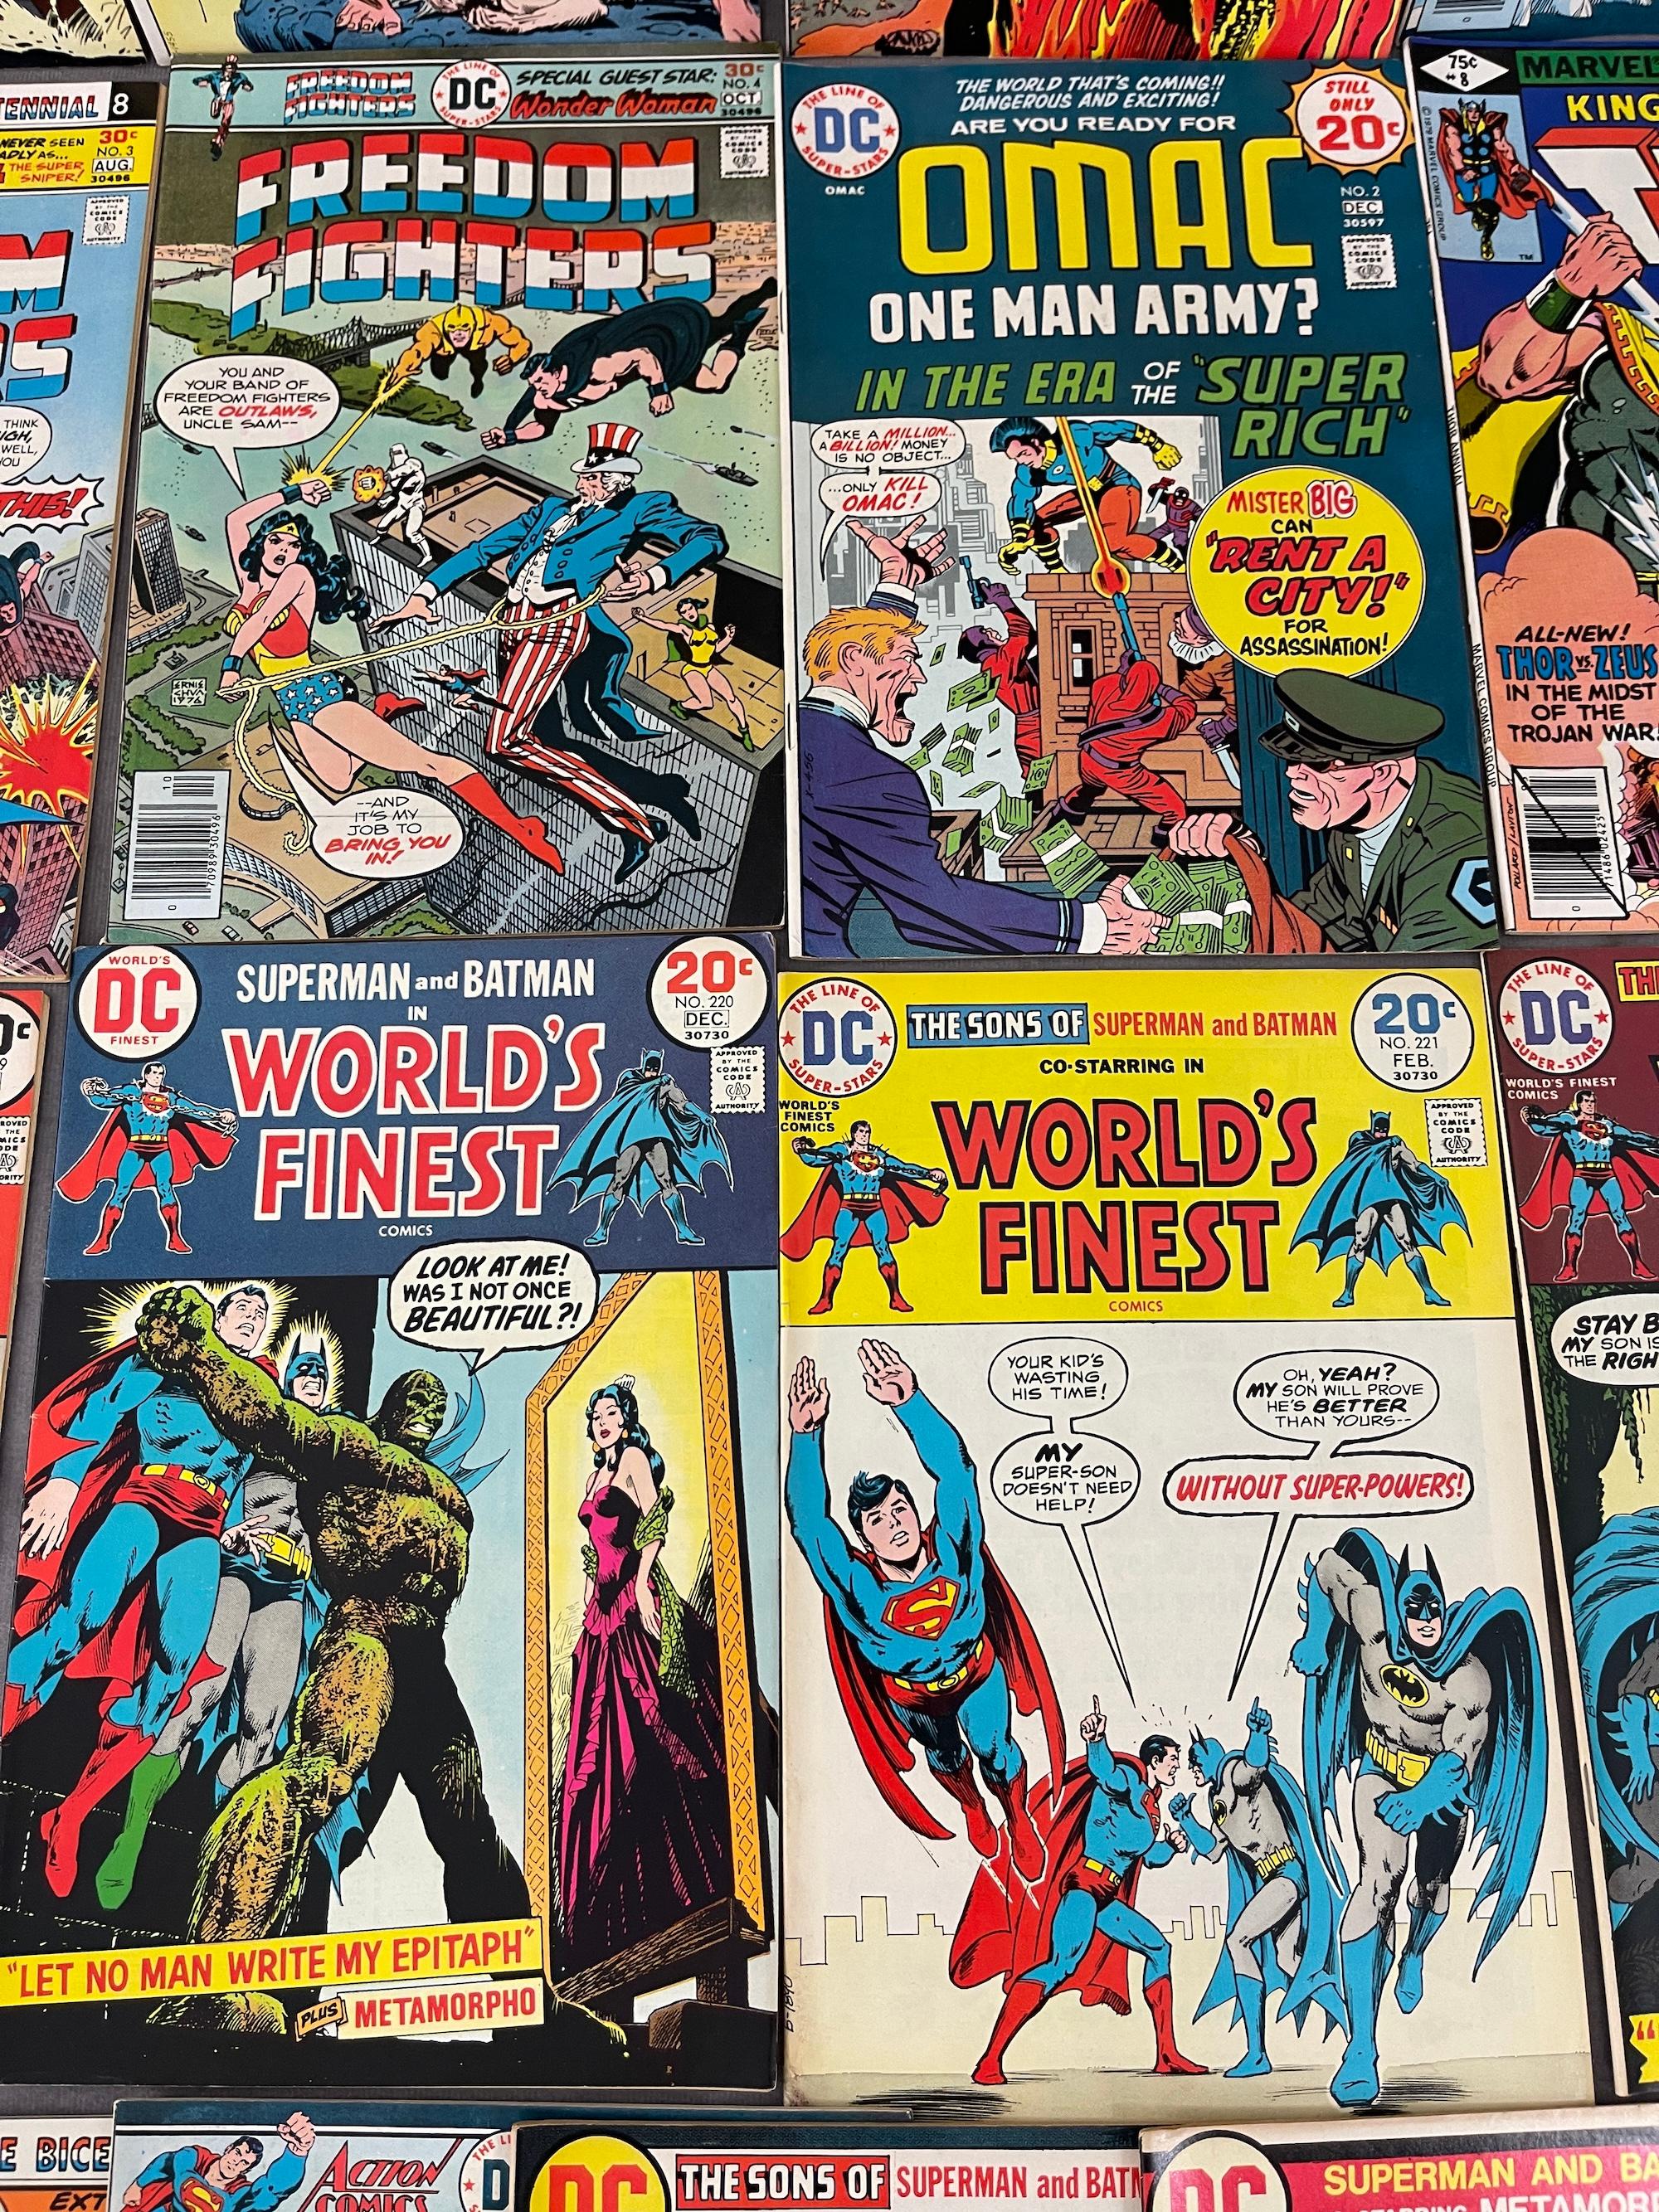 VINTAGE COMIC BOOK COLLECTION TOR AND WORLDS FINEST BATMAN DC COMICS LOT 22